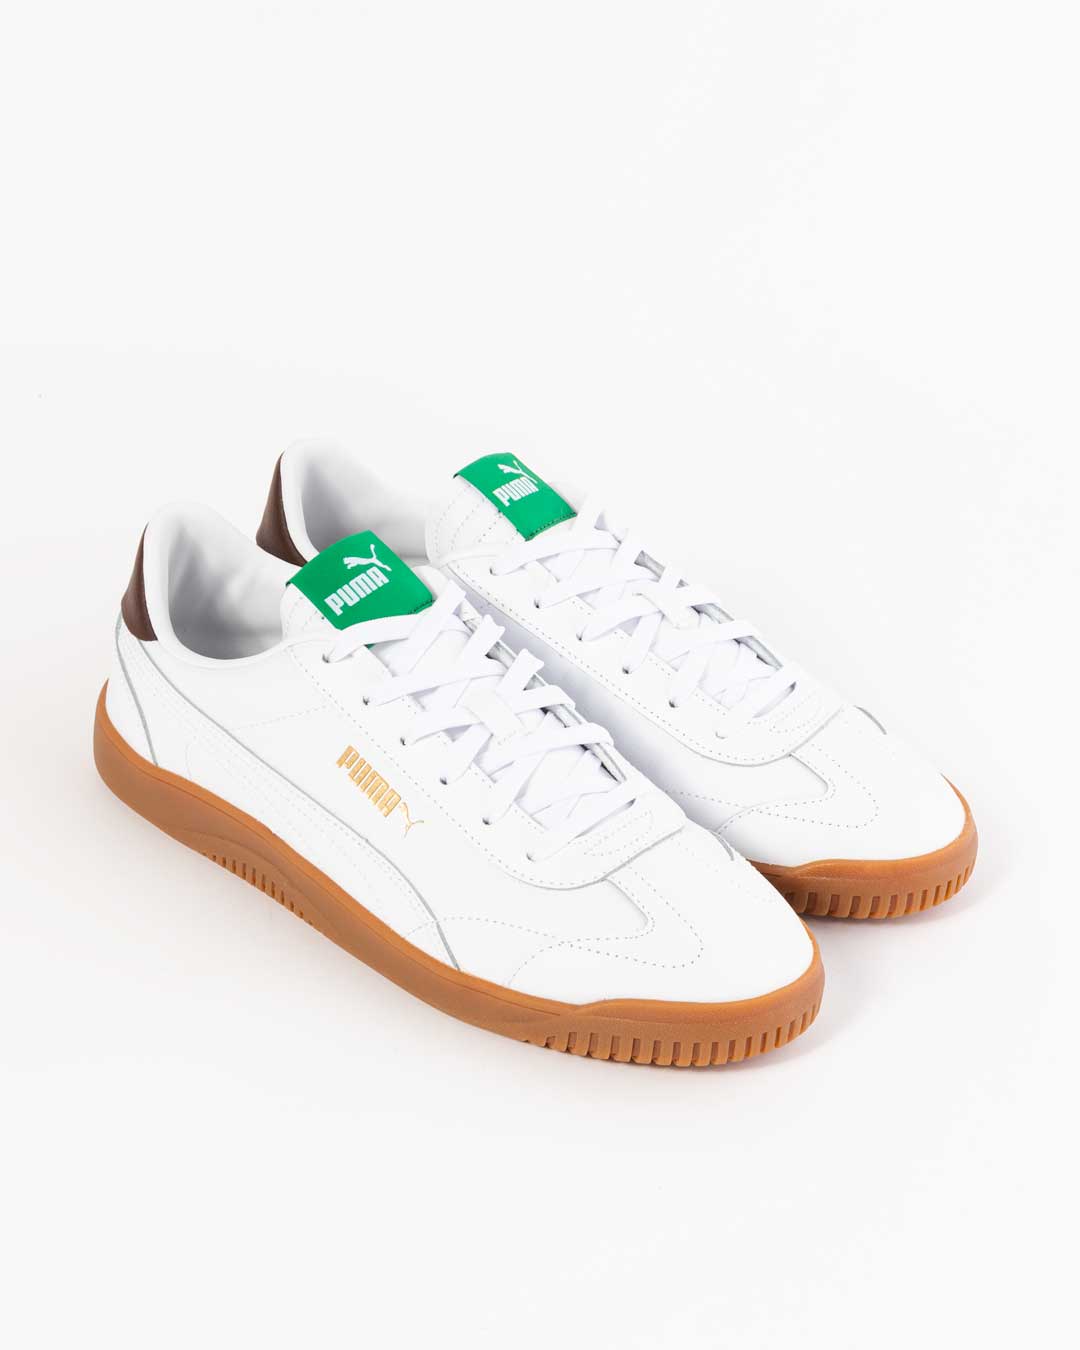 side angled profile of puma men's sneakers in white with gum sole and puma logo in gold. Green paneling on tongue with Puma logo in white